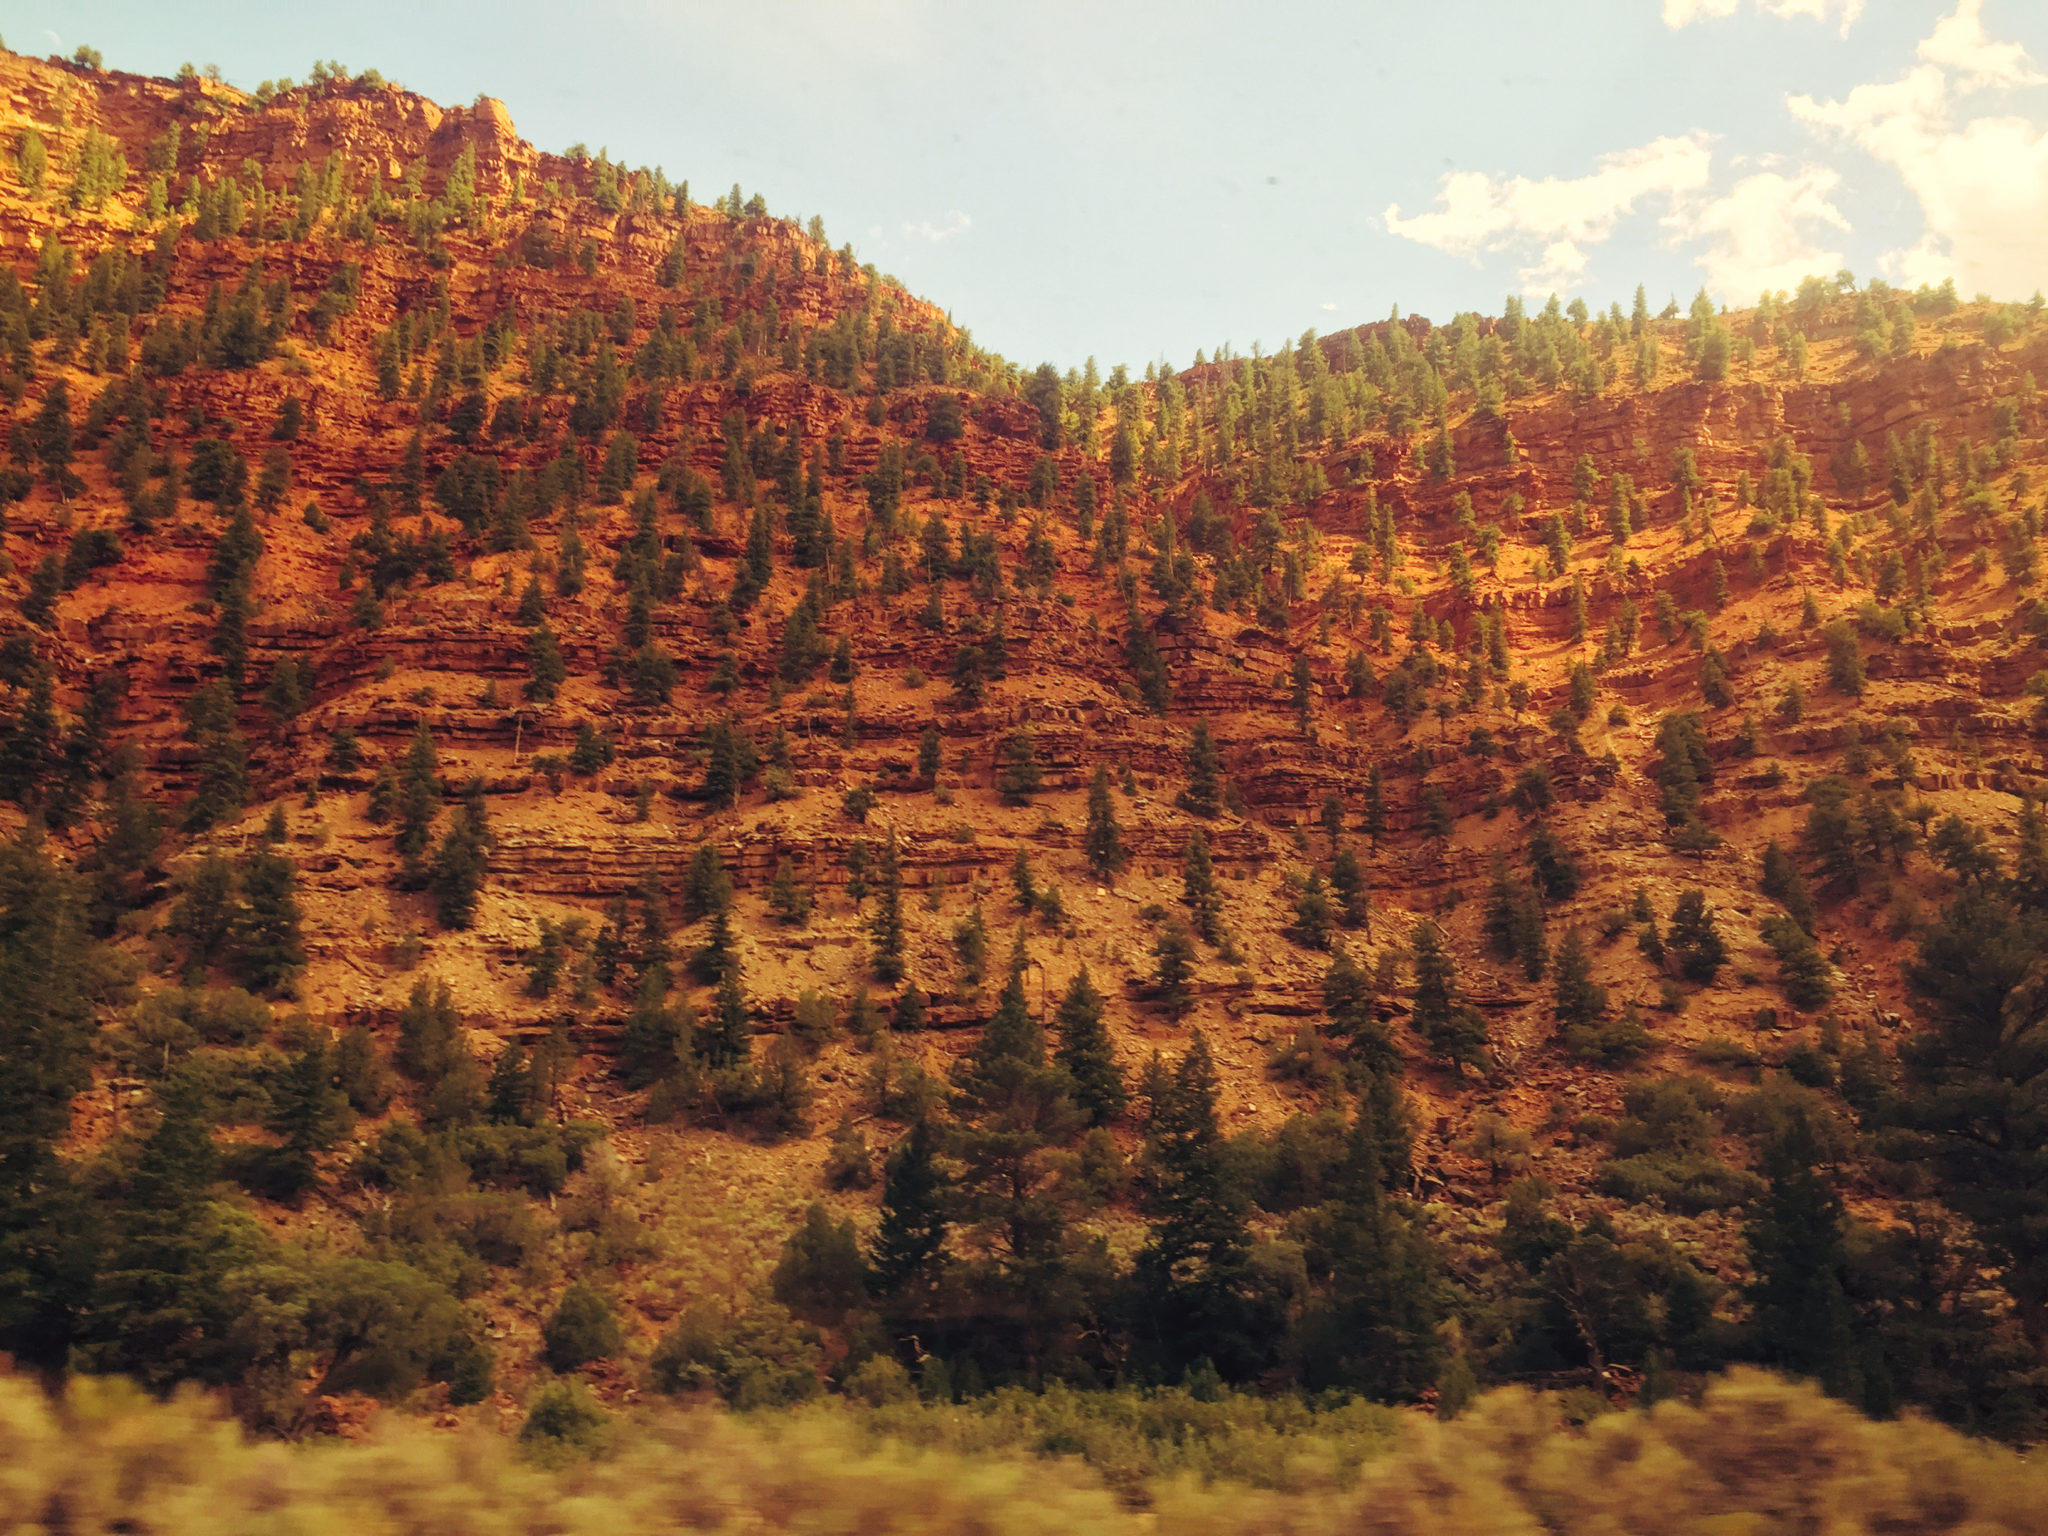 First Time on the California Zephyr: The Rails Less Traveled